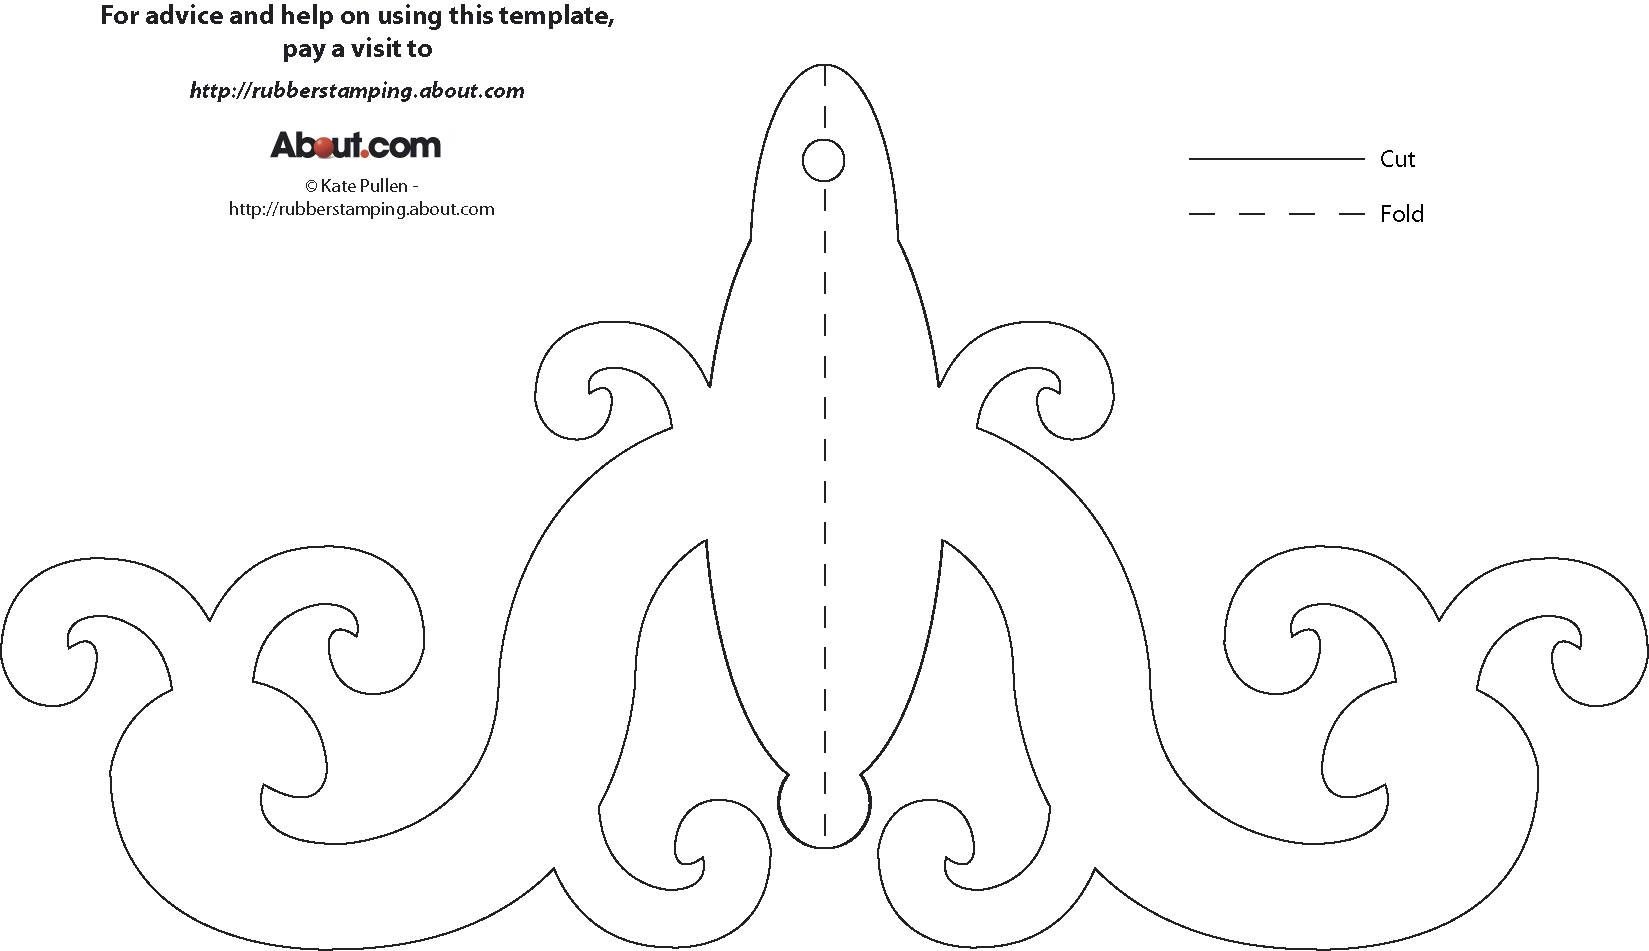 Download The Chandelier Template To Make An Attractive Decoration - Free Printable Chandelier Template